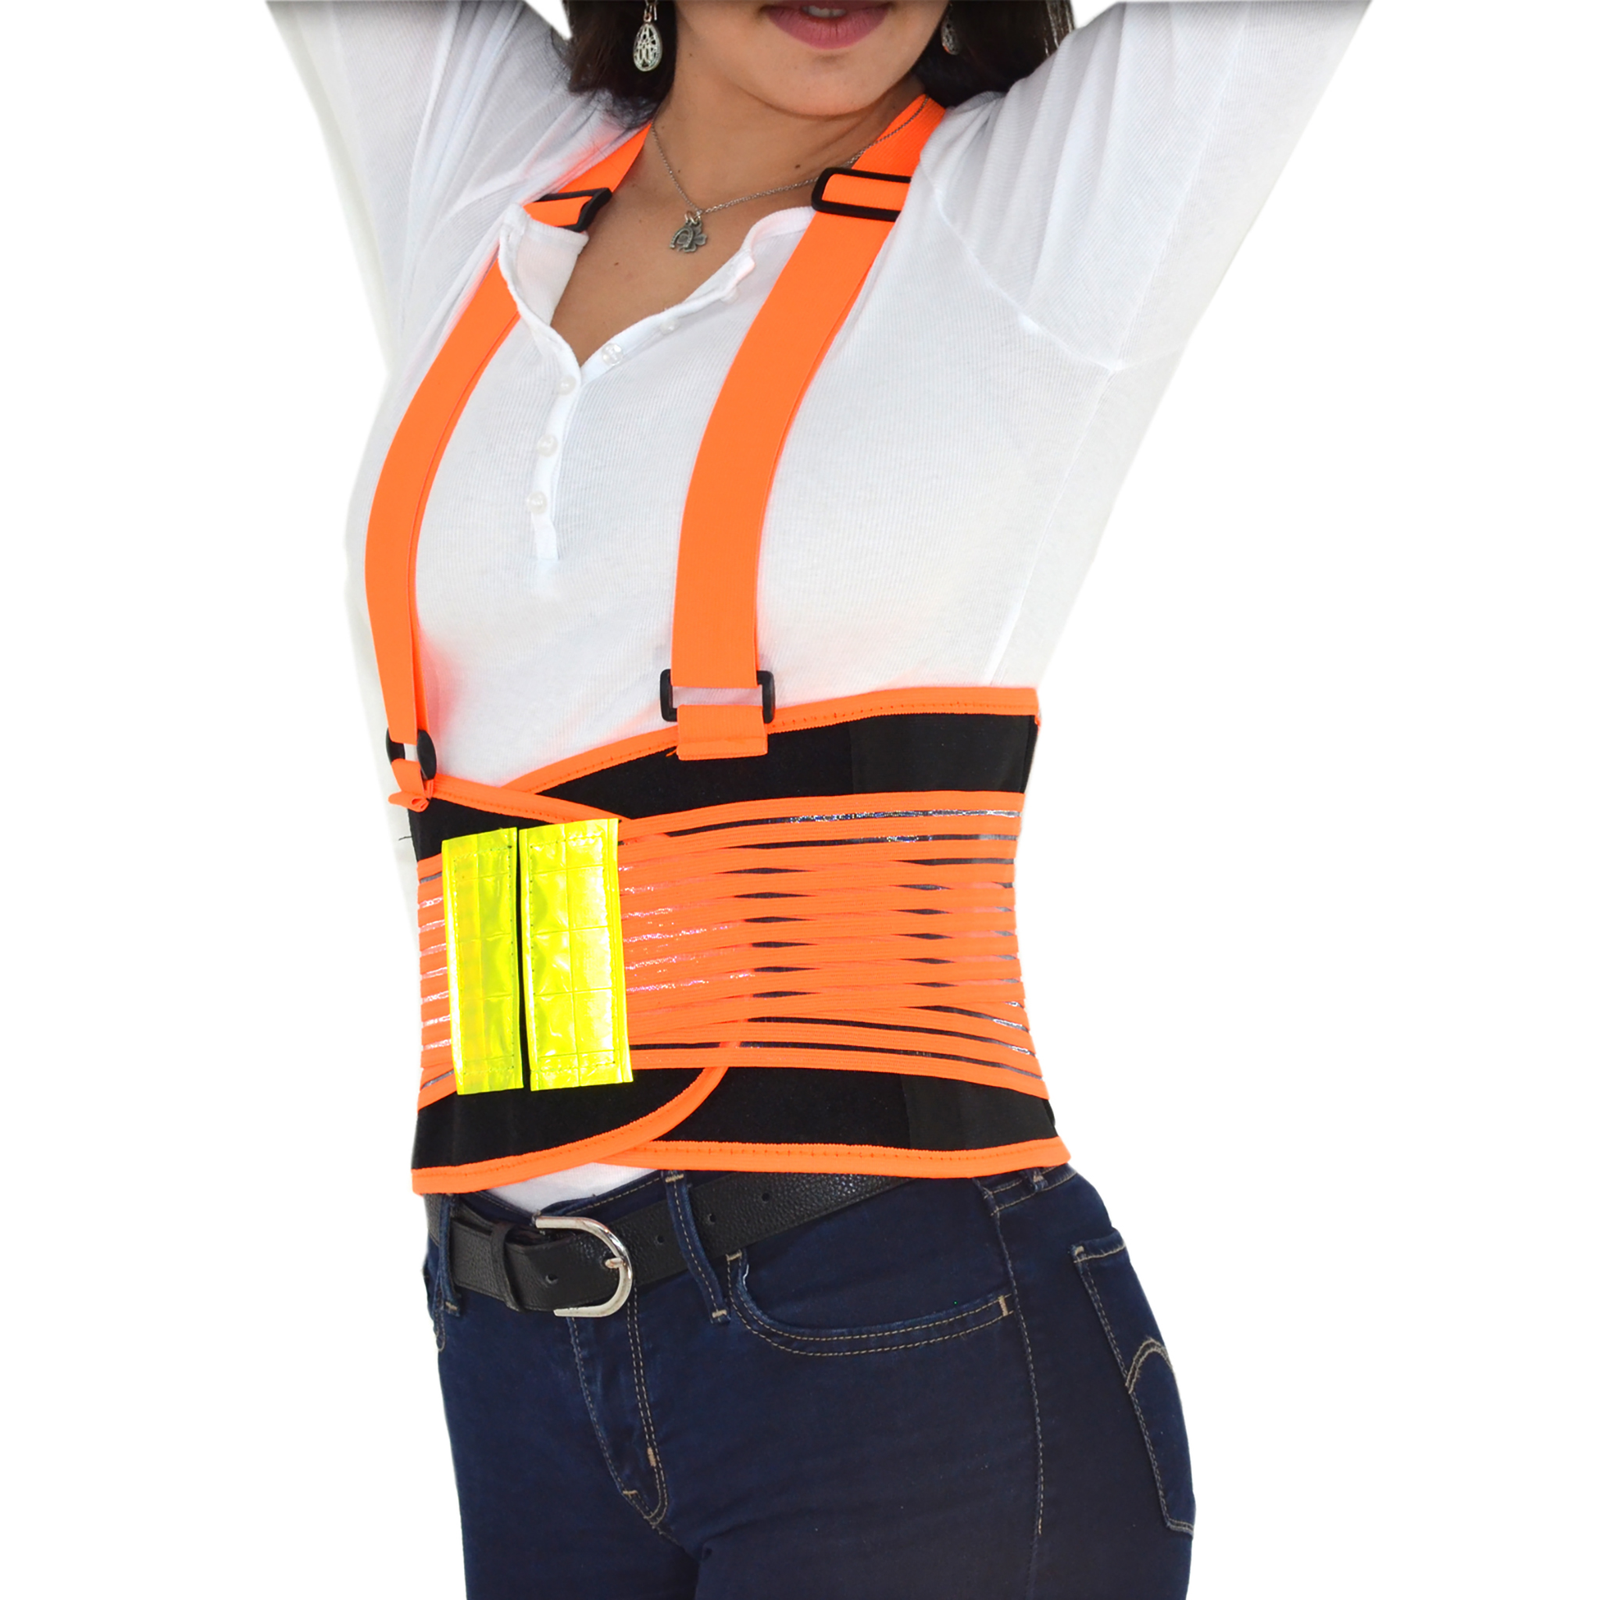 Diagonal view of a lady wearing the Orange and reflective JORESTECH heavy duty back support belt with suspenders